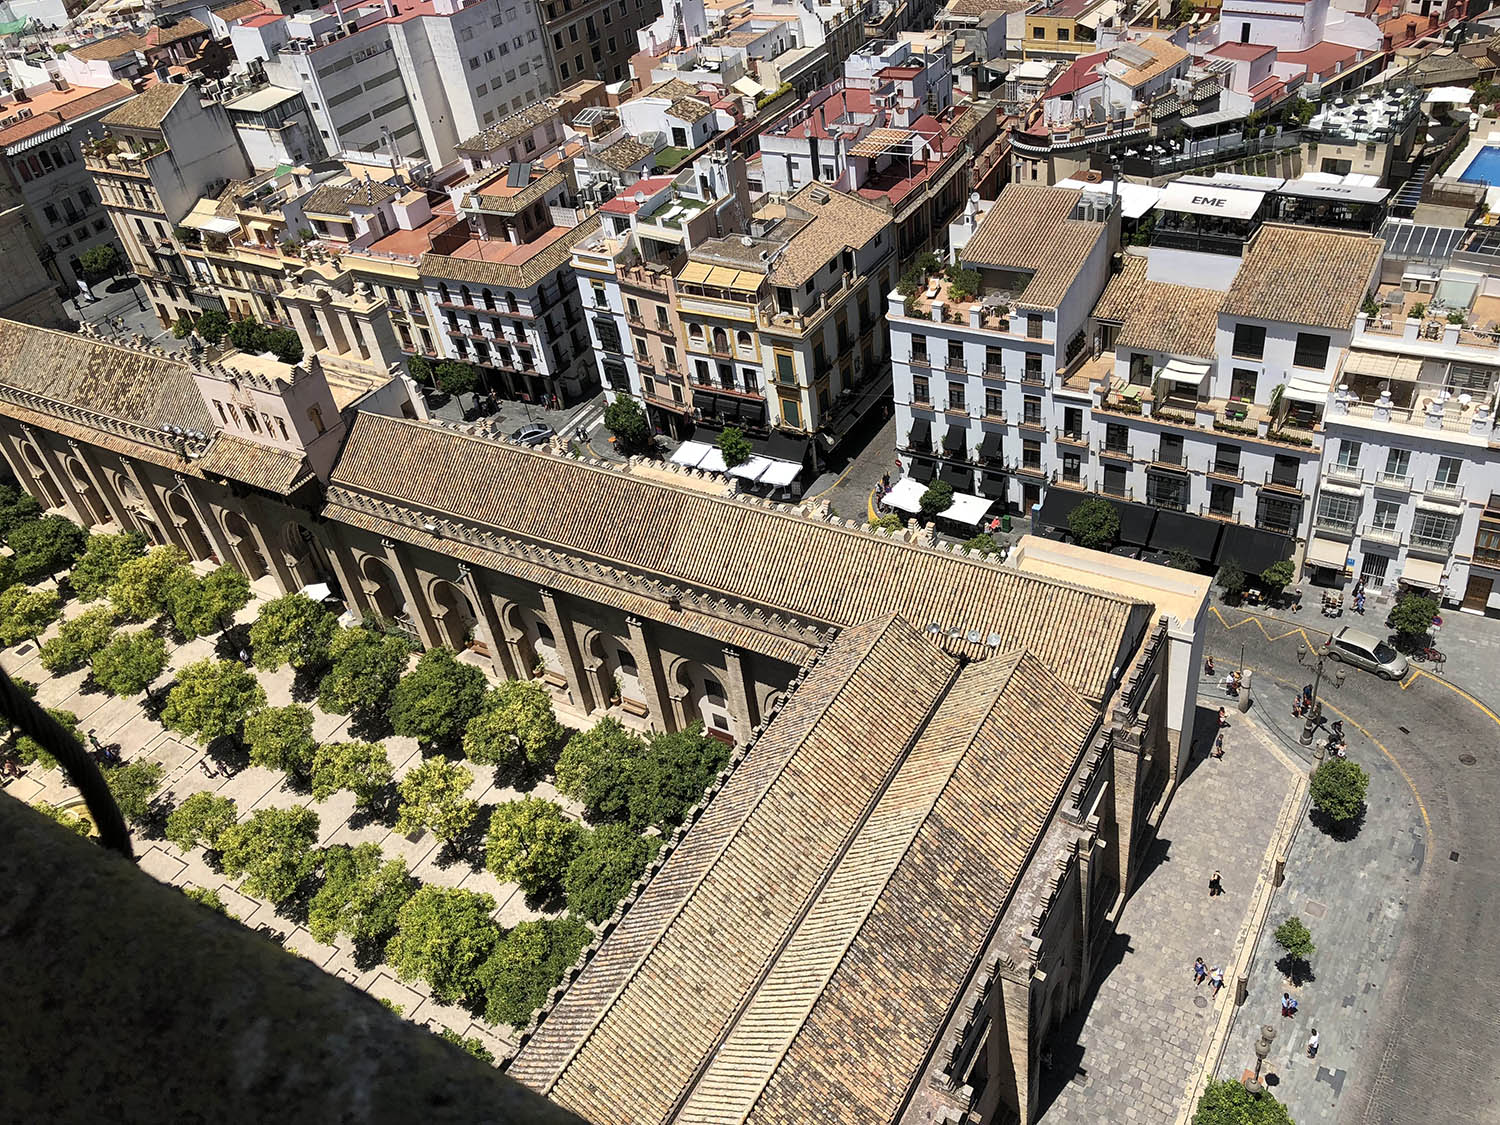 Mezquita de Sevilla - Partial view from above of the Orange Tree Courtyard.